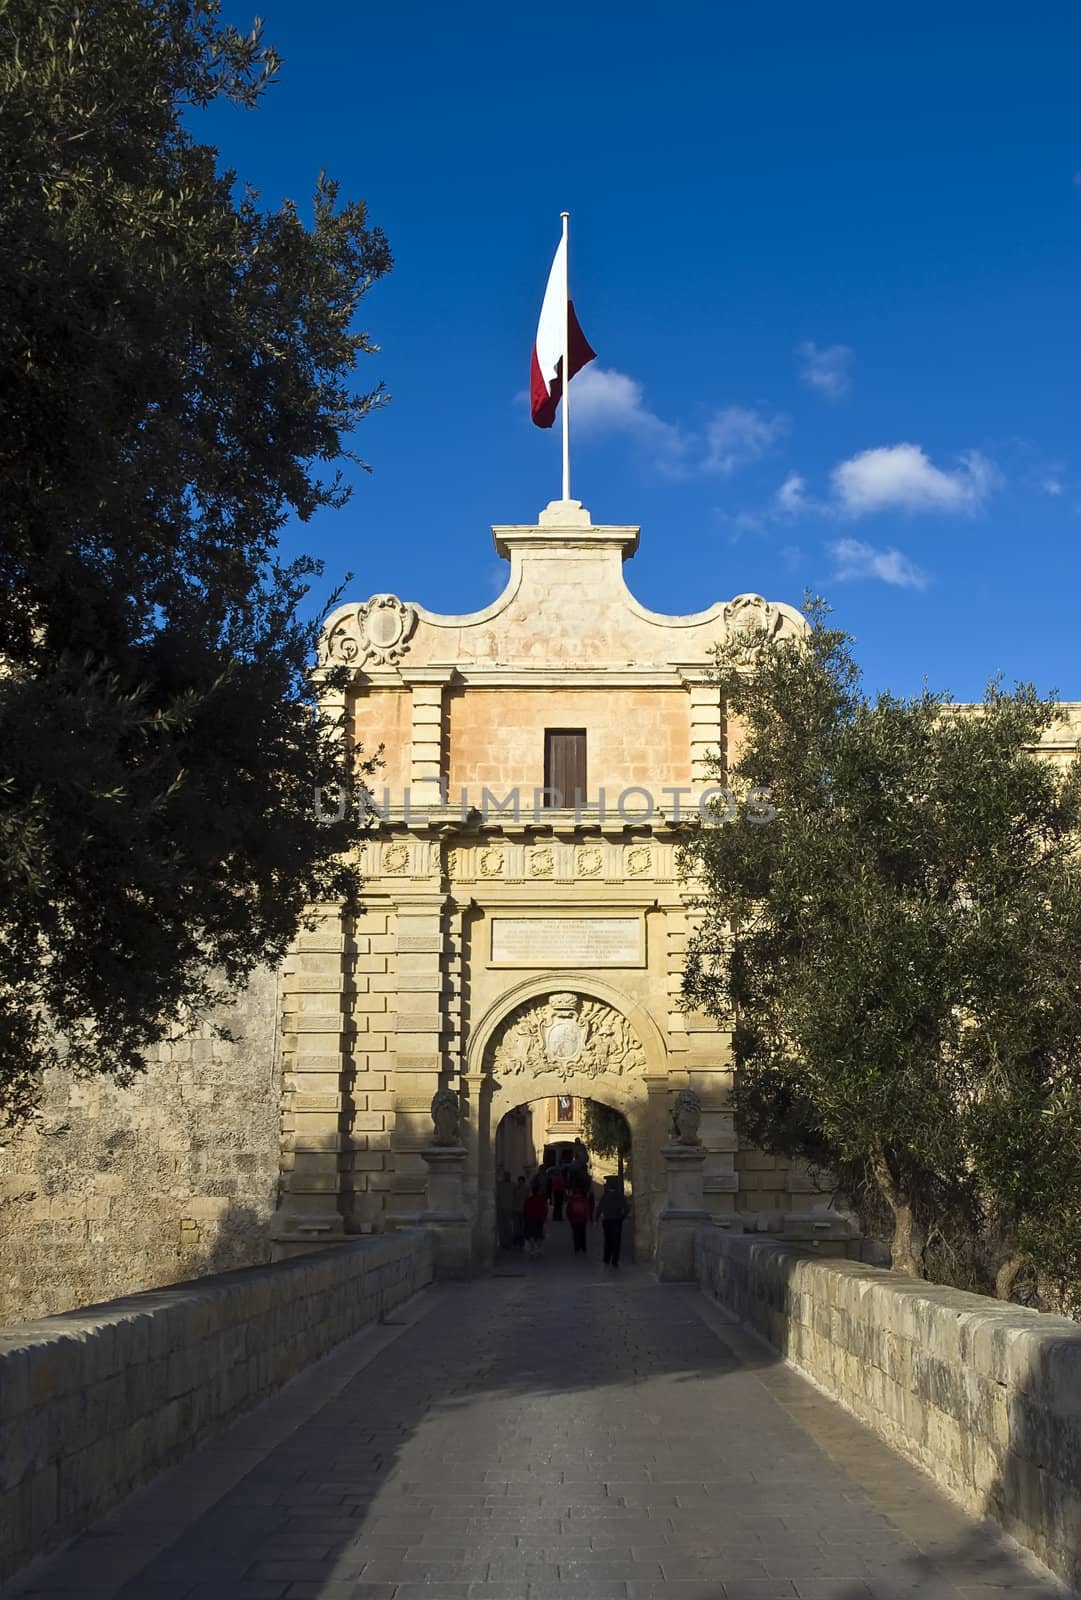 The medieval gateway to the silent city of Mdina in Malta